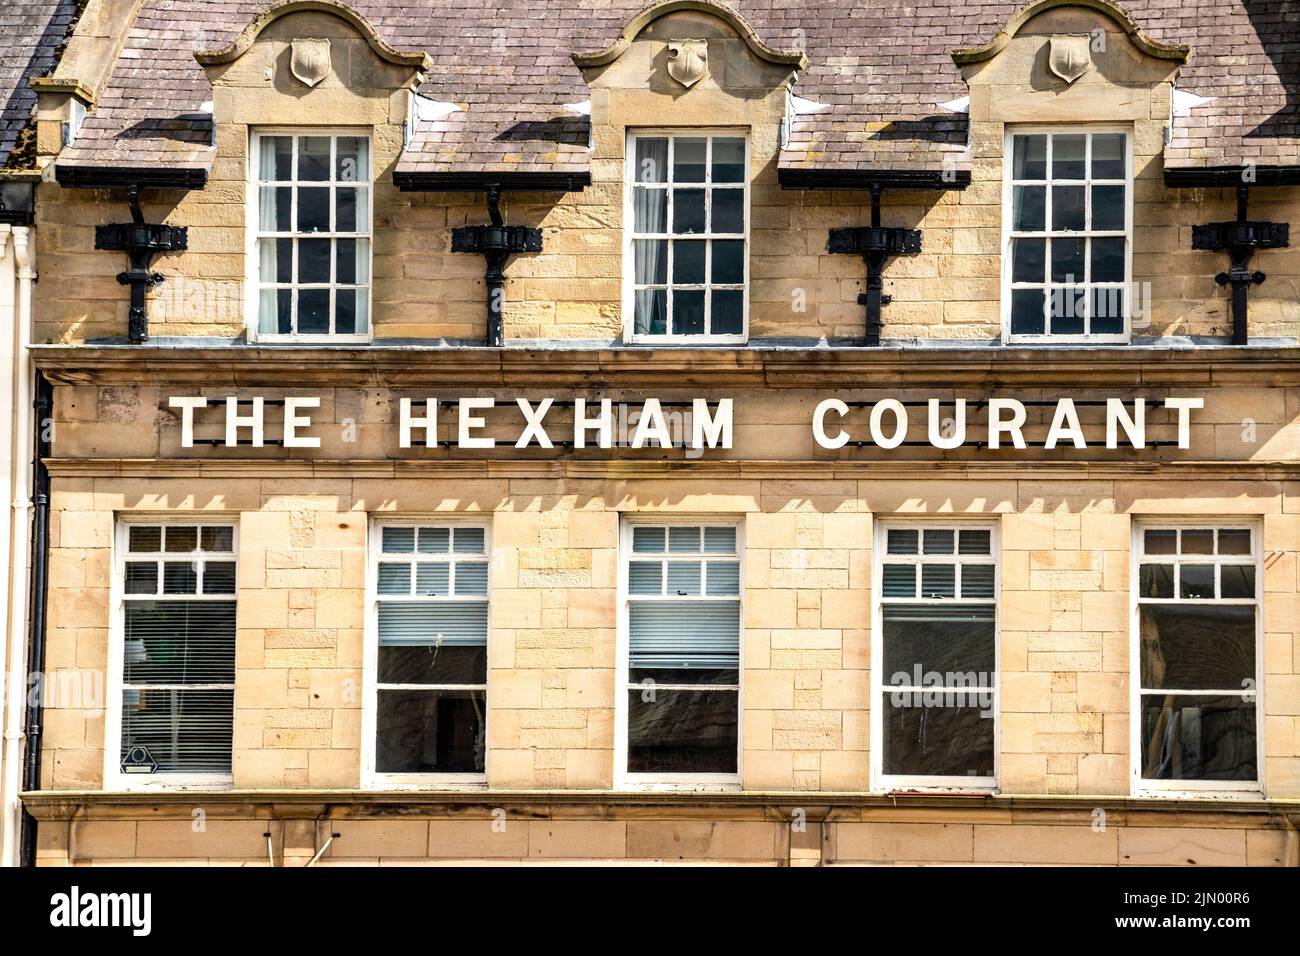 sign for the Hexham courant local newspaper offices in Hexham Northumberland Stock Photo